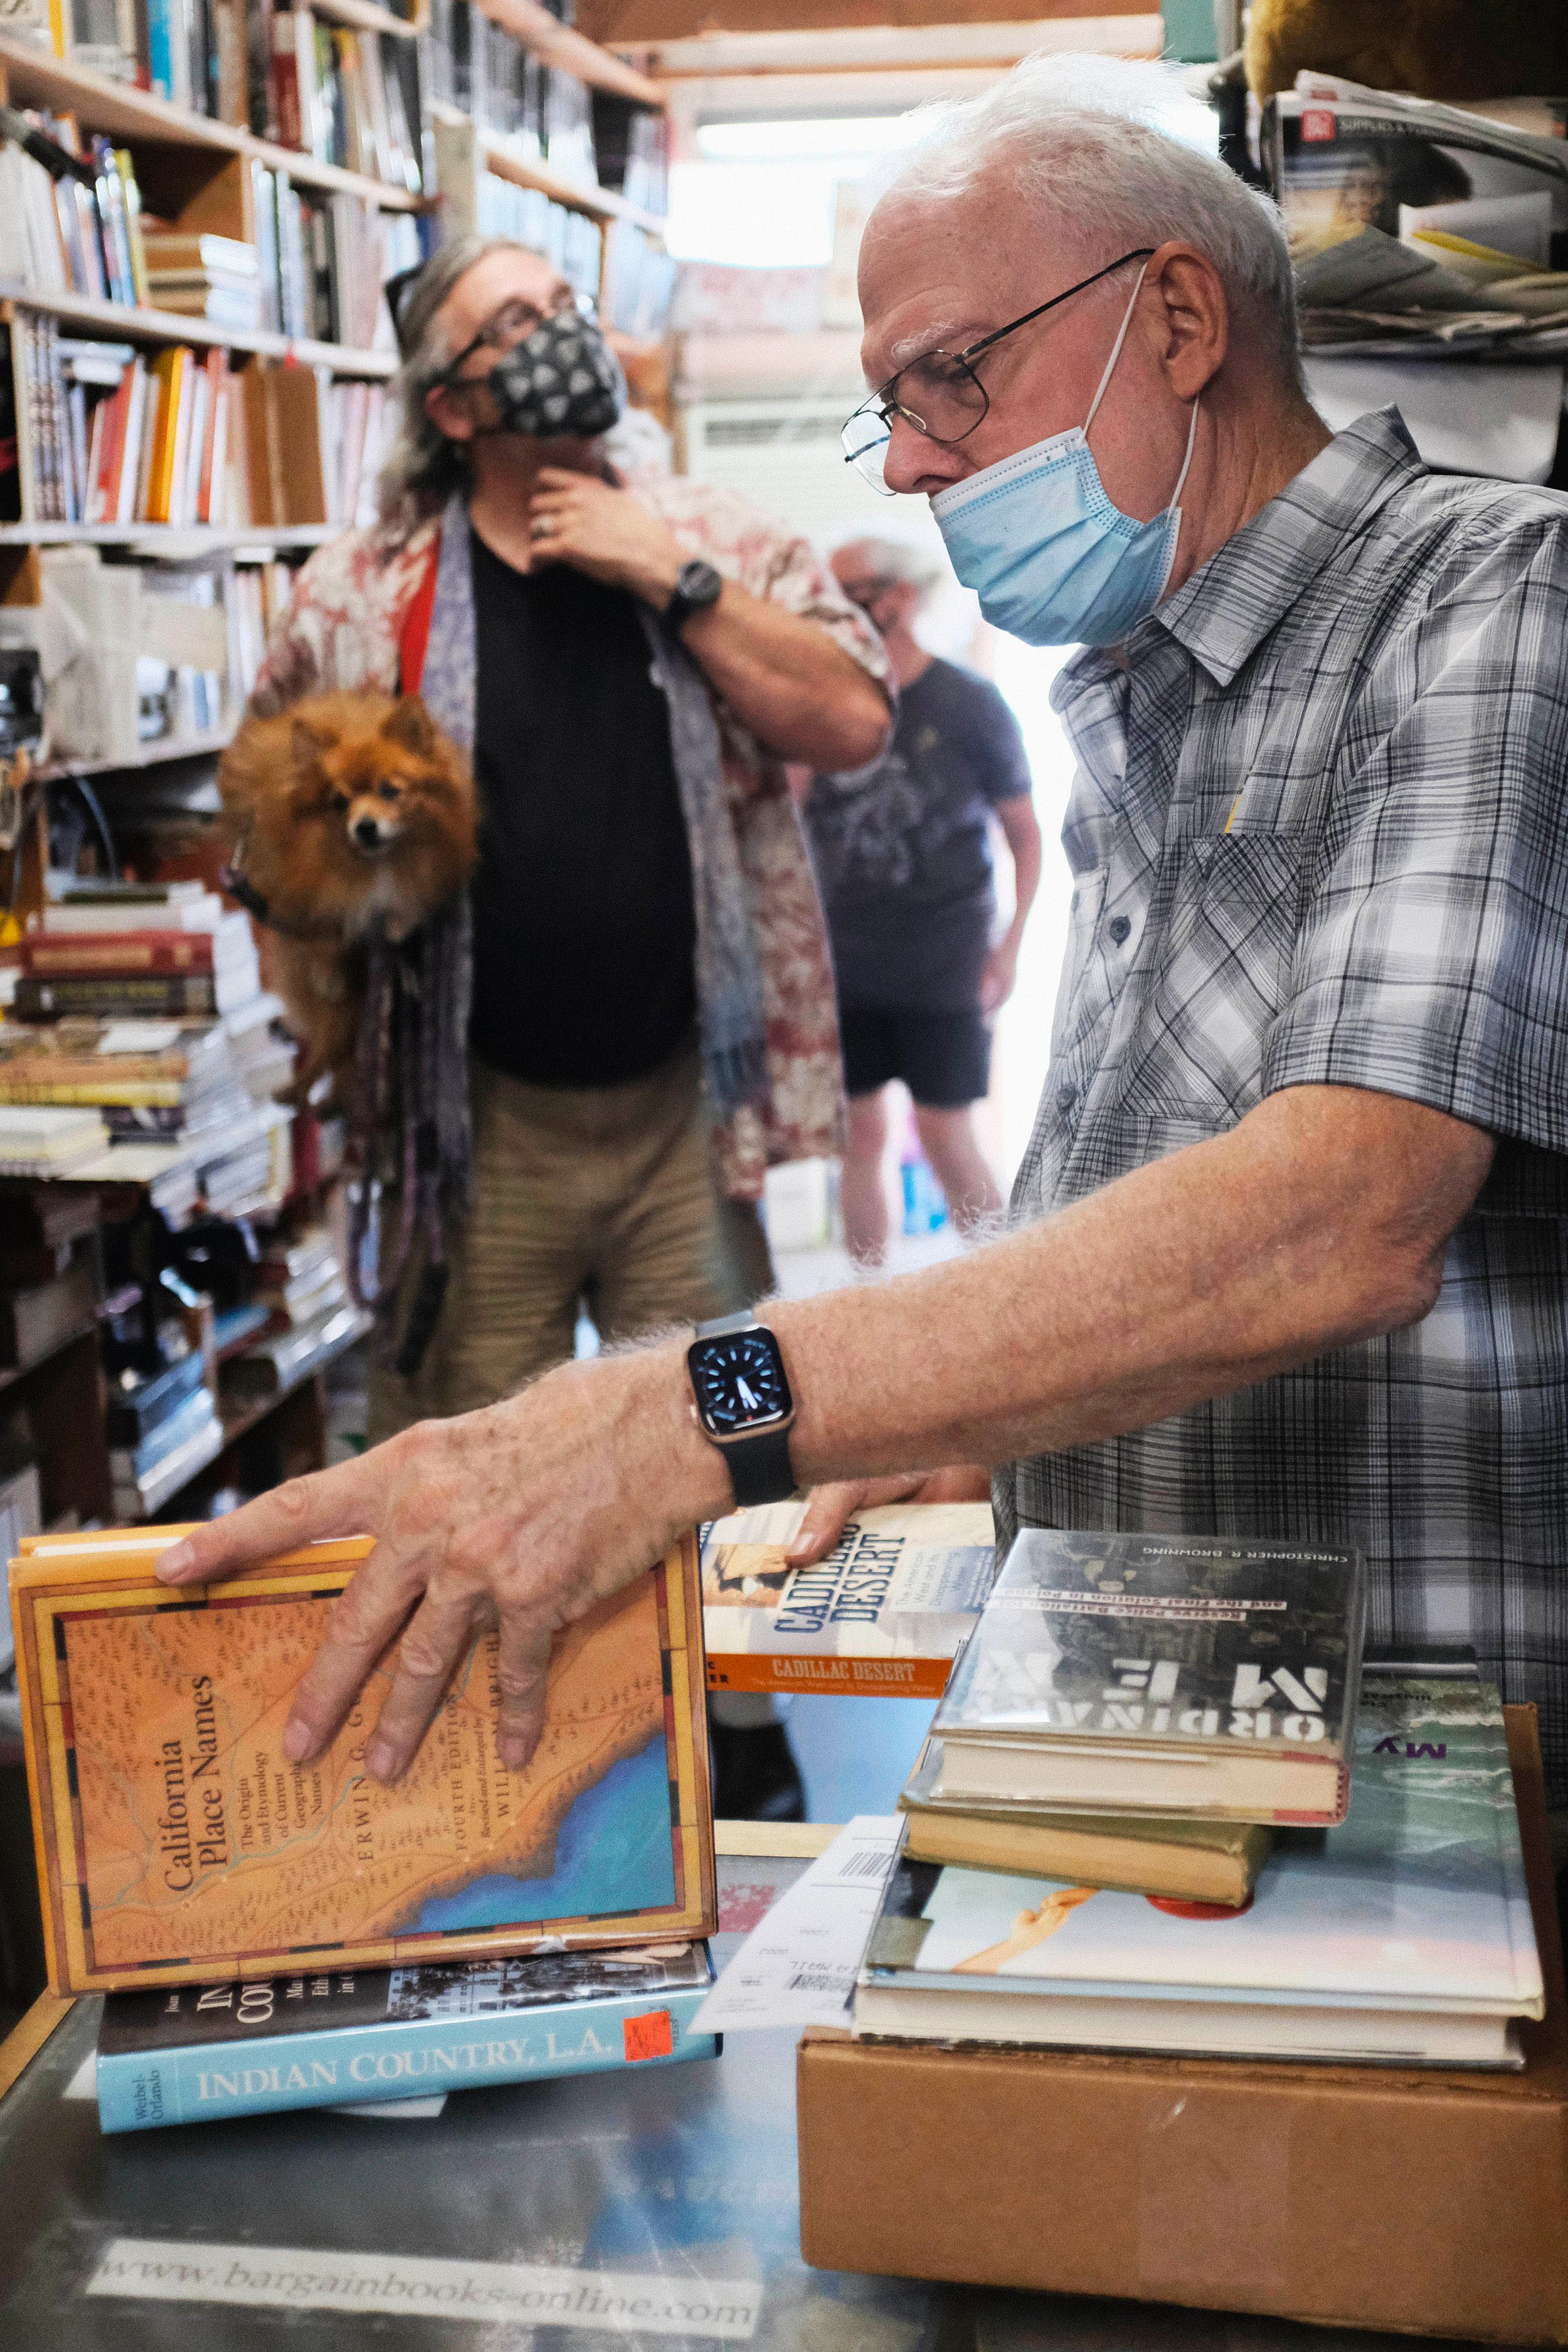  Bill Wirt checks prices on books as he checks out a customer. Heavy foot traffic comes from the back entrance of the store, as on Saturday’s they open the back door for a $1 book section, at Bargain Books in Van Nuys, California. Saturday, October 2